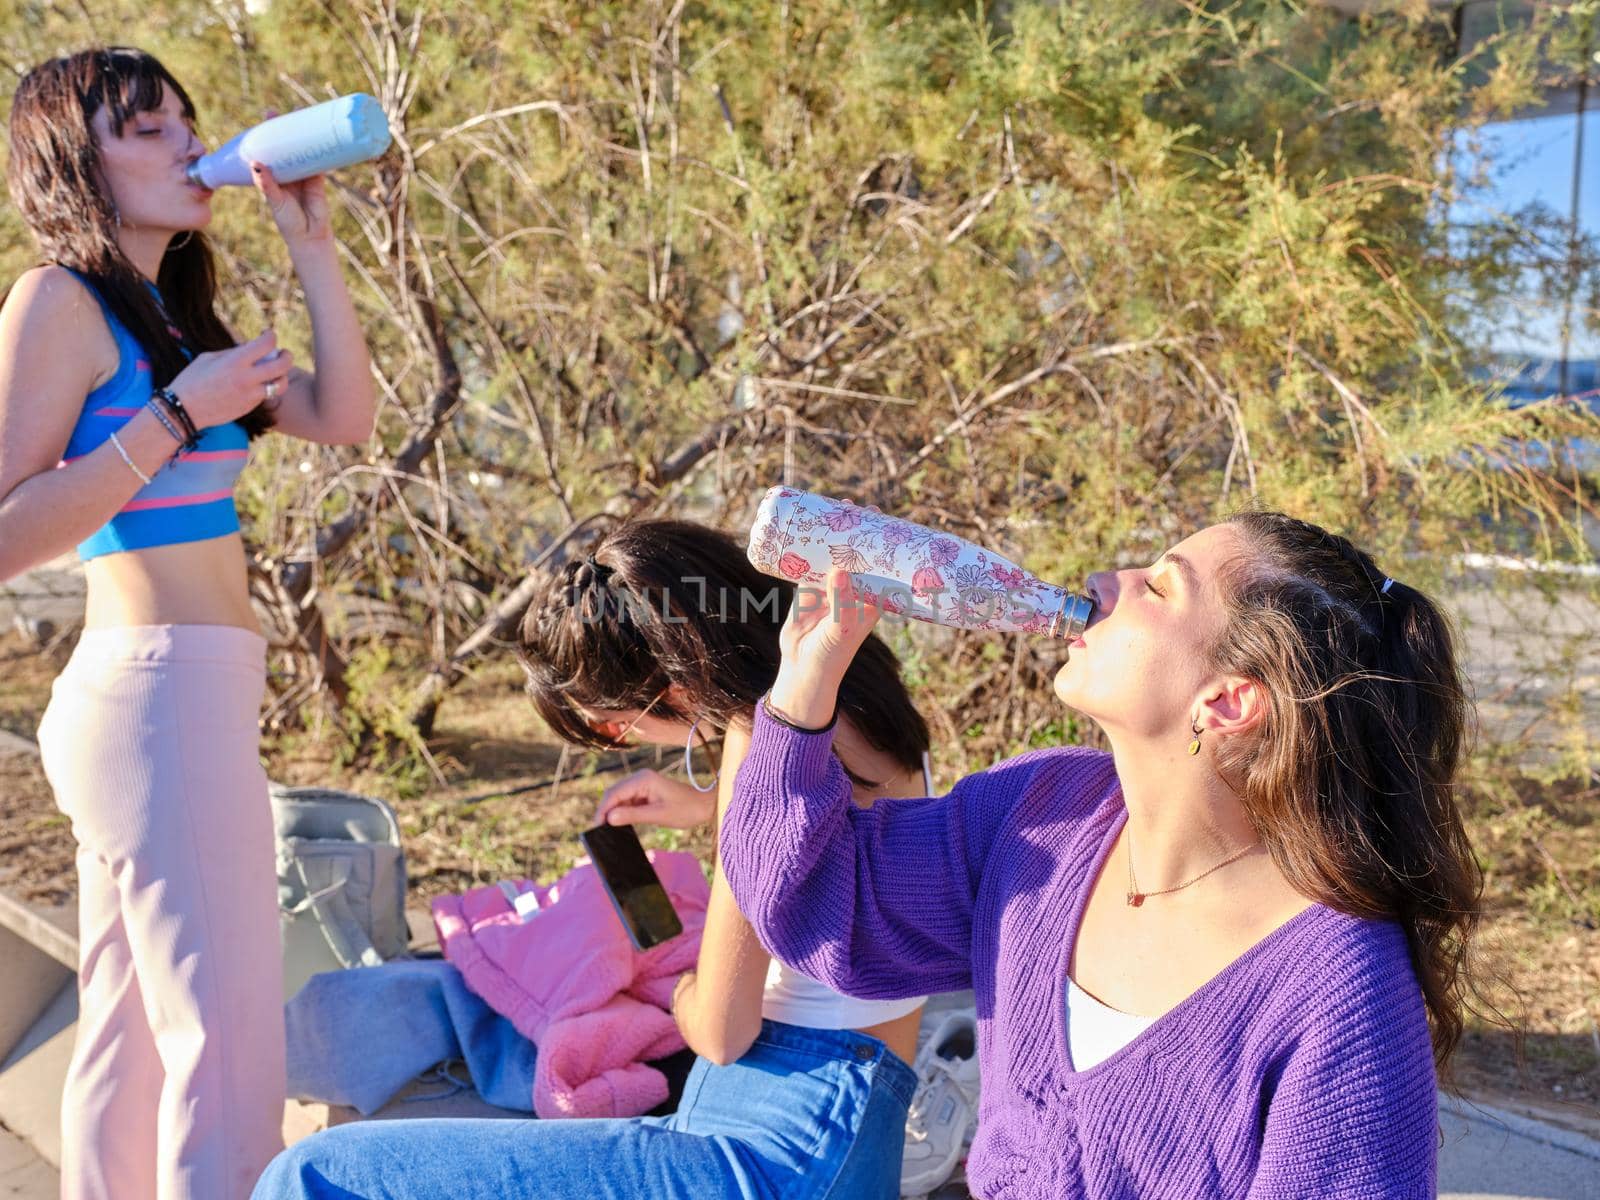 Three young women wearing vintage clothes drinking water after skate in a park during a sunny day